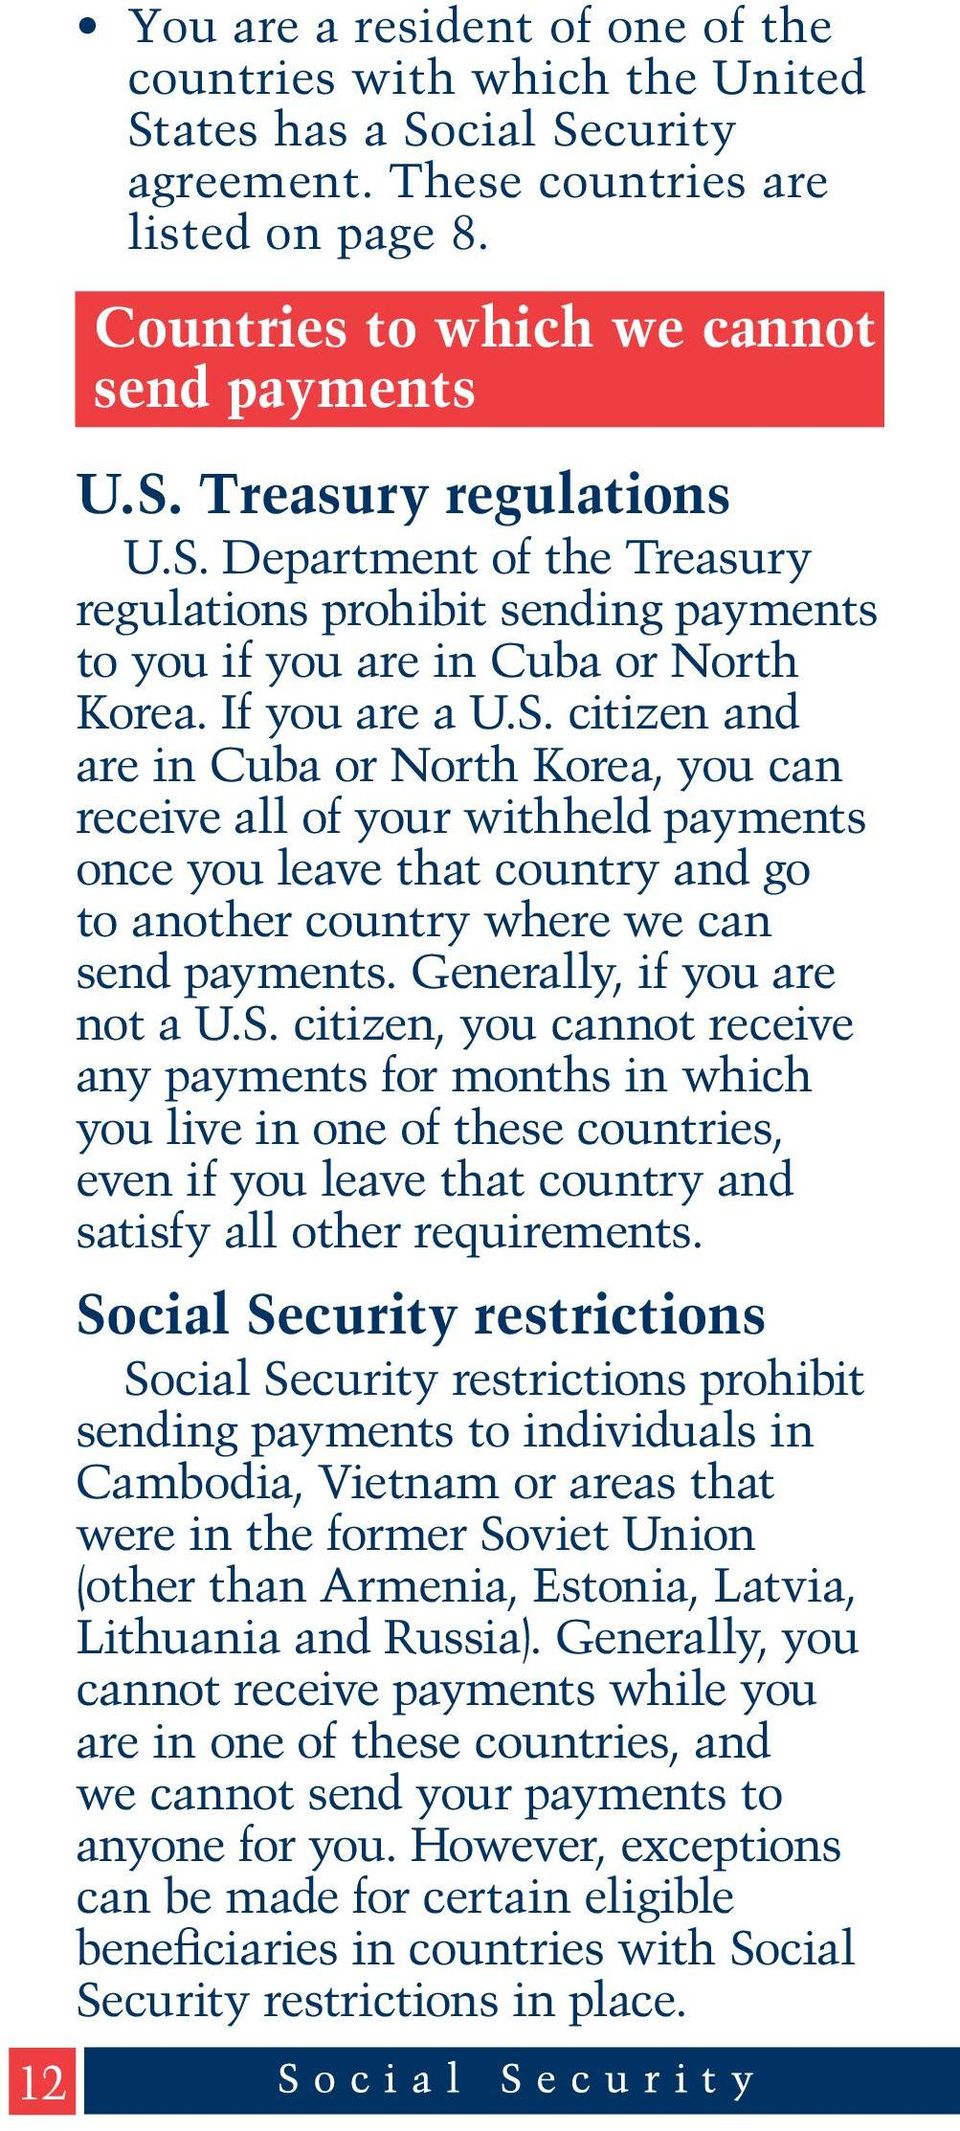 Generally, if you are not a U.S. citizen, you cannot receive any payments for months in which you live in one of these countries, even if you leave that country and satisfy all other requirements.